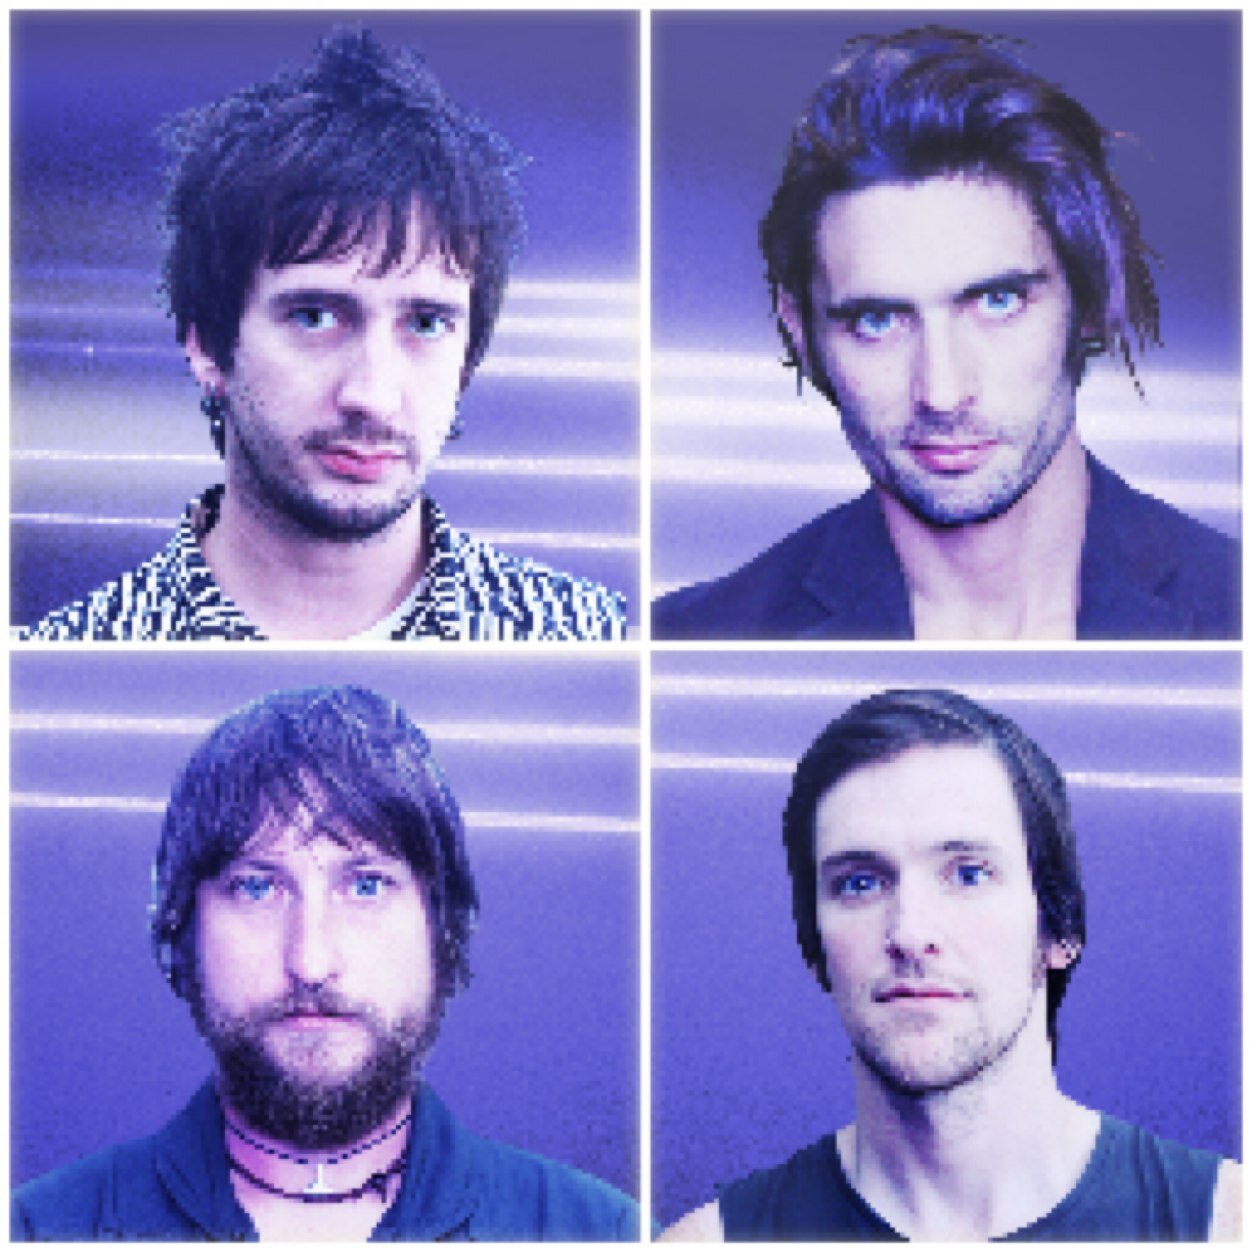 Fan profile of The All-American Rejects. Tyson Ritter Air Out Now-
Stillwater, Oklahoma